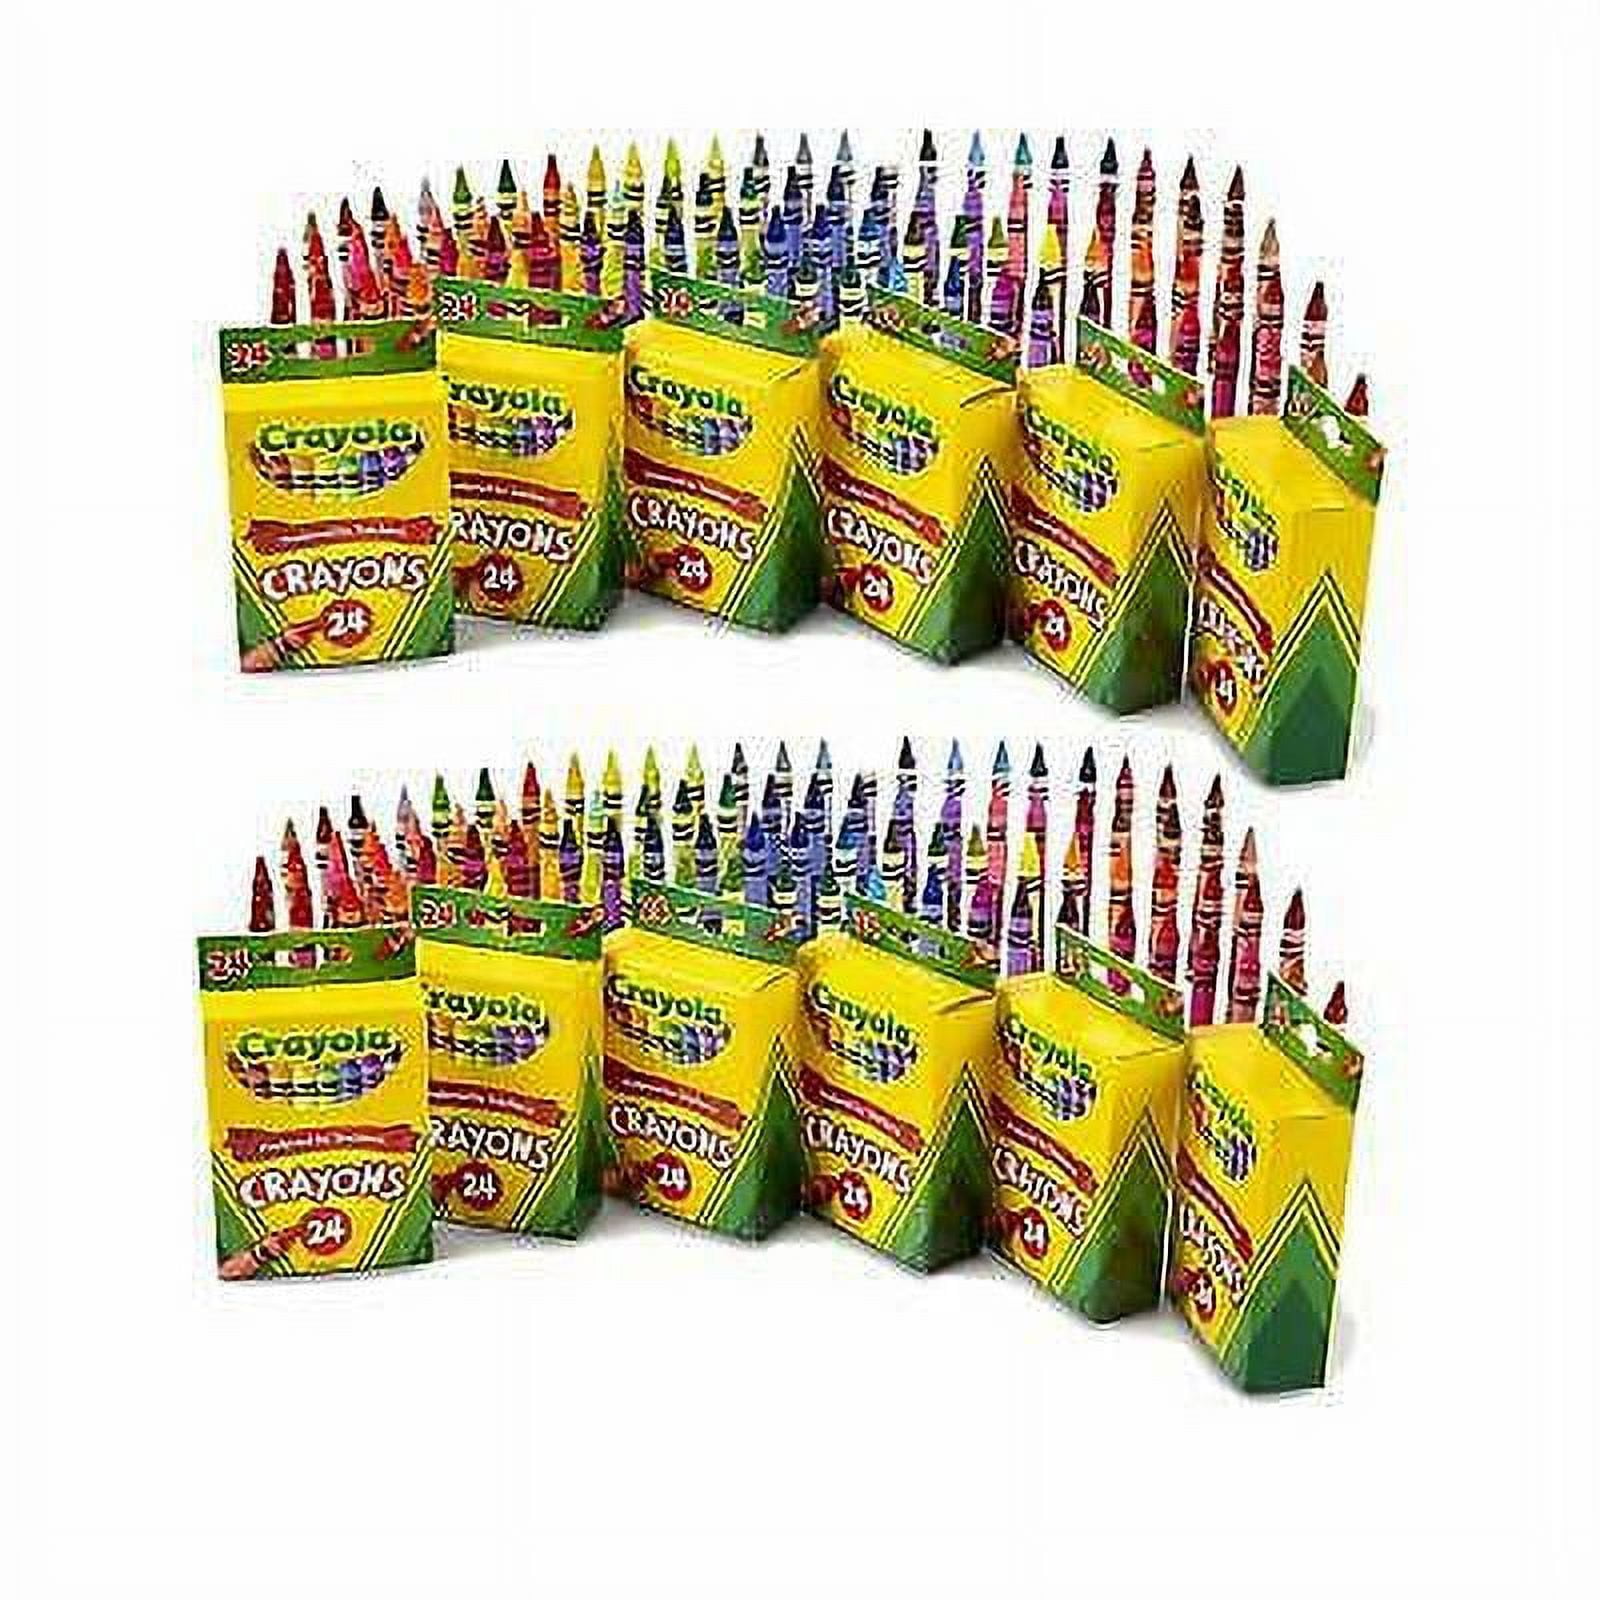 Crayola 50 Count Washable Super Tips,Styles May Vary